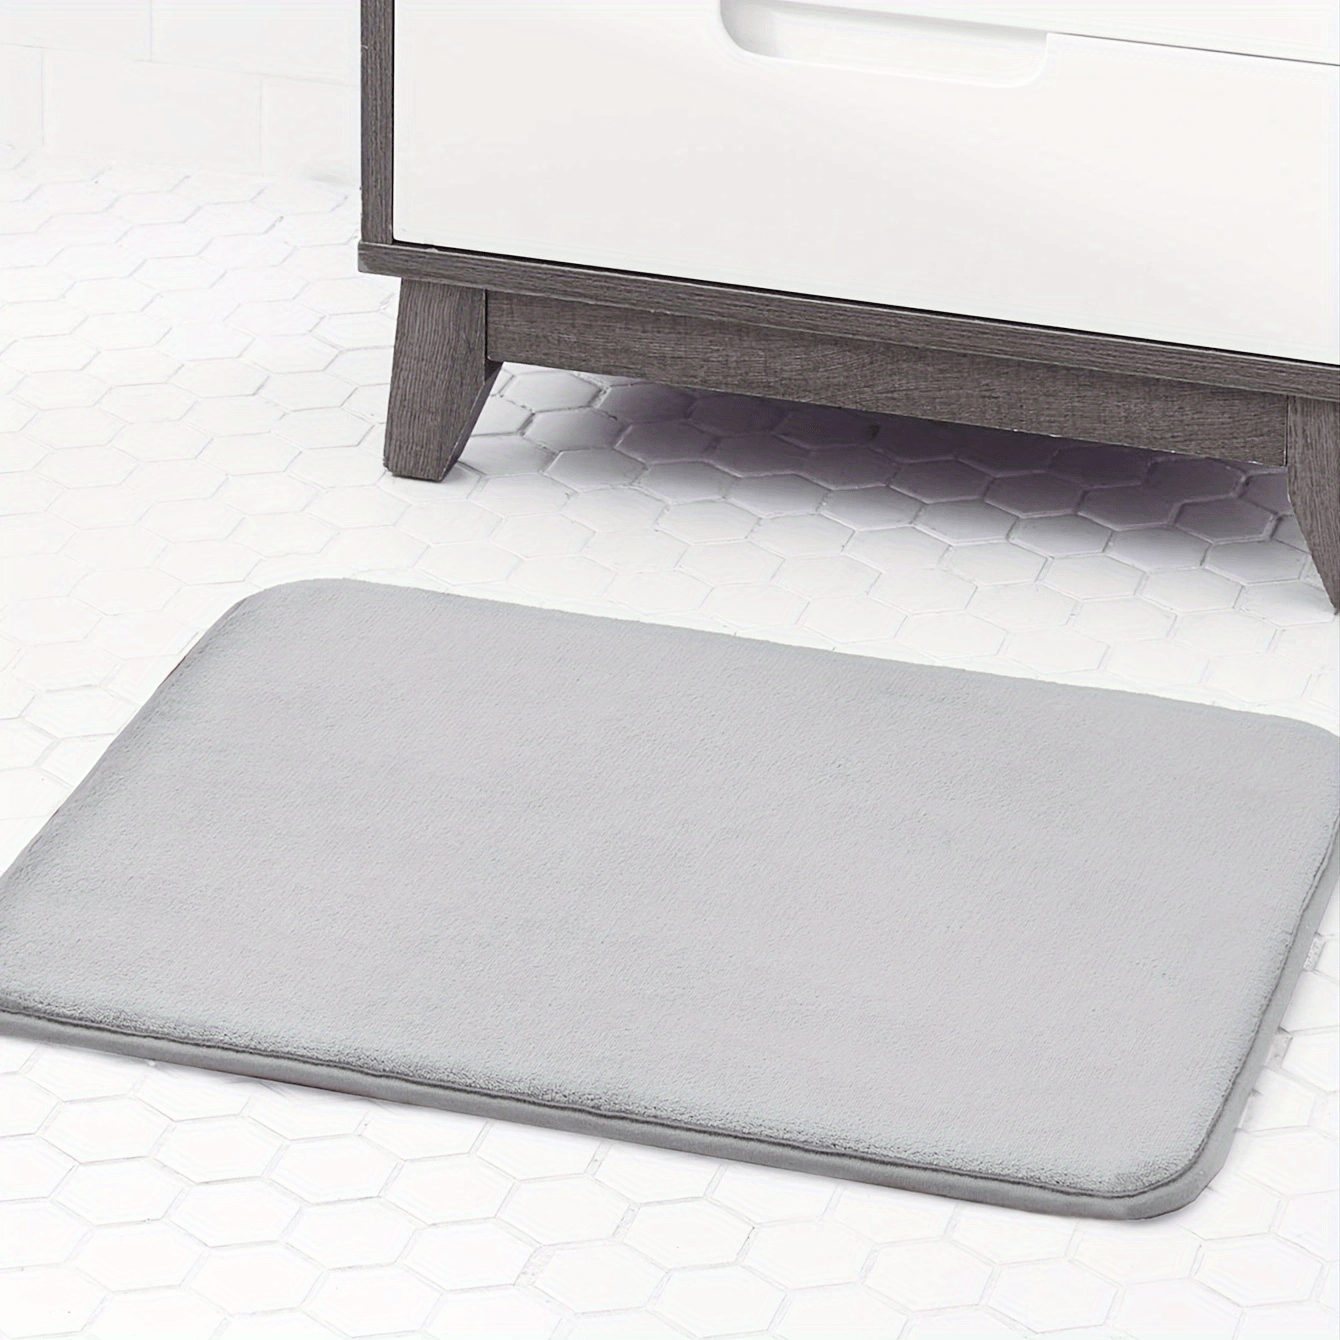 Olanly Non Slip Silicone Bath Mat Soft Memory Foam Foot Gray Bathroom Rugs  For Shower, Bathroom, And Stone Floor Super Absorbent And Quick Dry Gray Bathroom  Rugs From Nan0010, $13.47